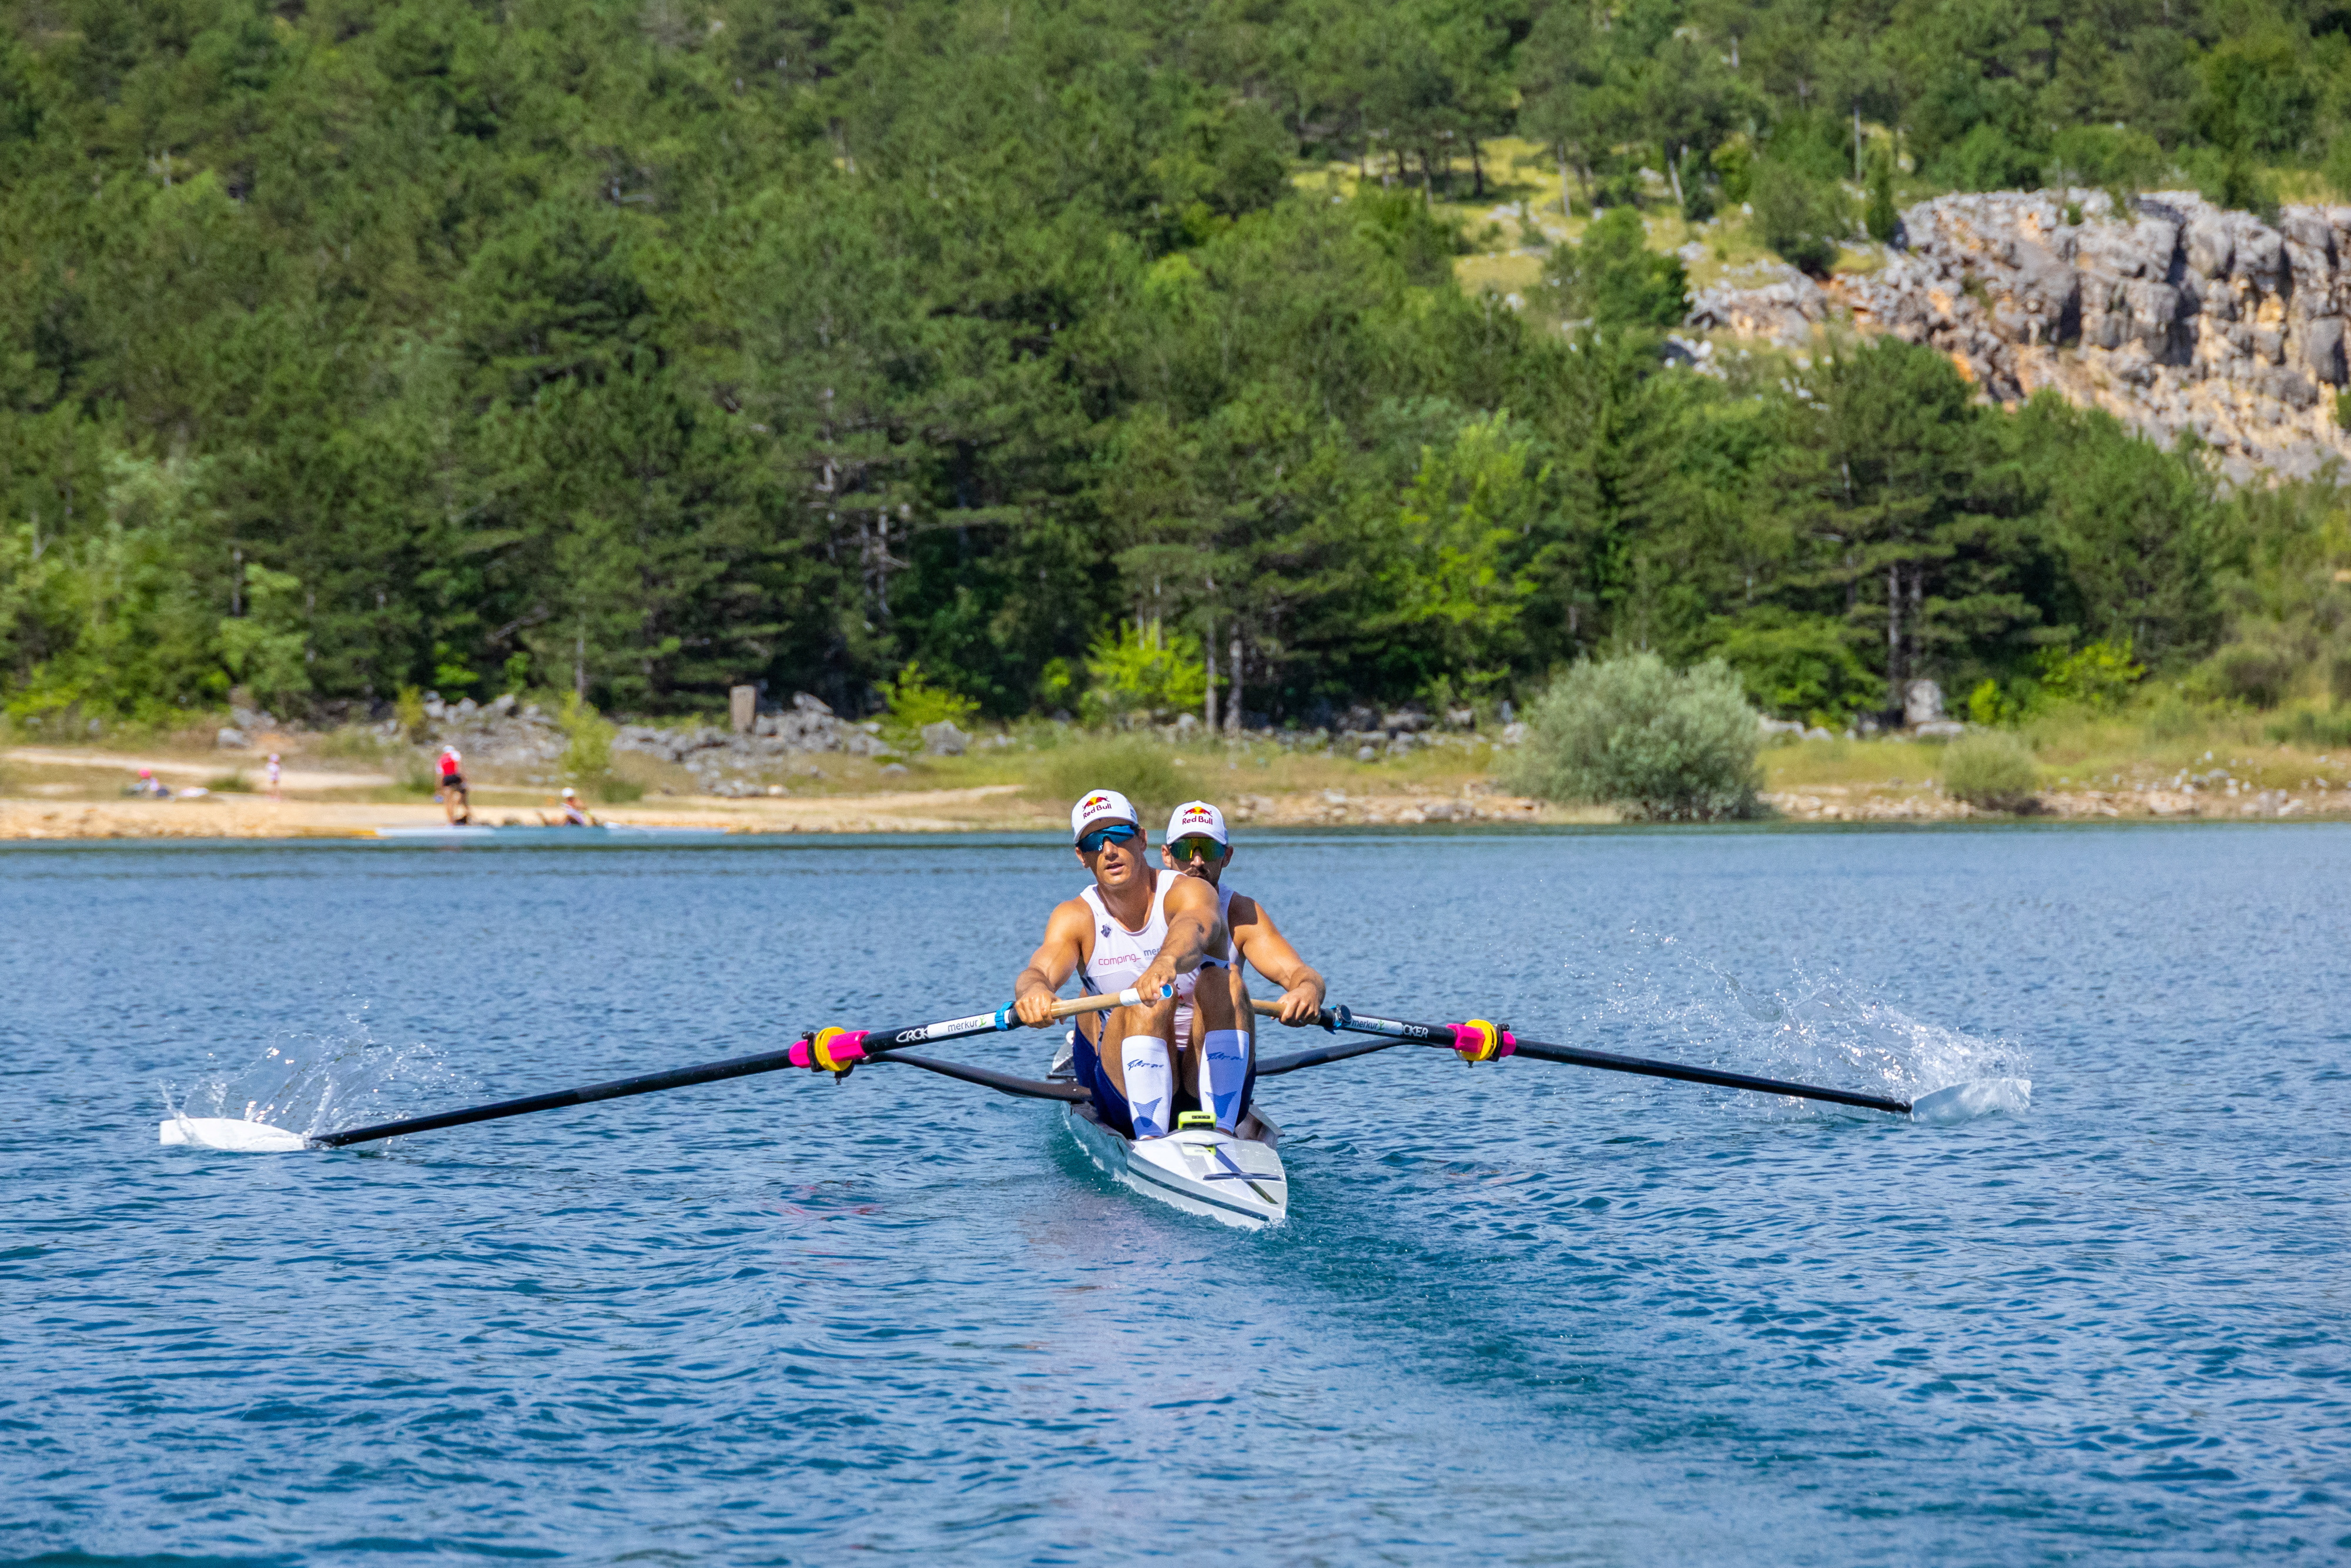 Croatia rowers Martin Sinkovic and Valent Sinkovic are seen during rowing practice at Peruca Lake for the Paris 2024 Olympics near Sinj